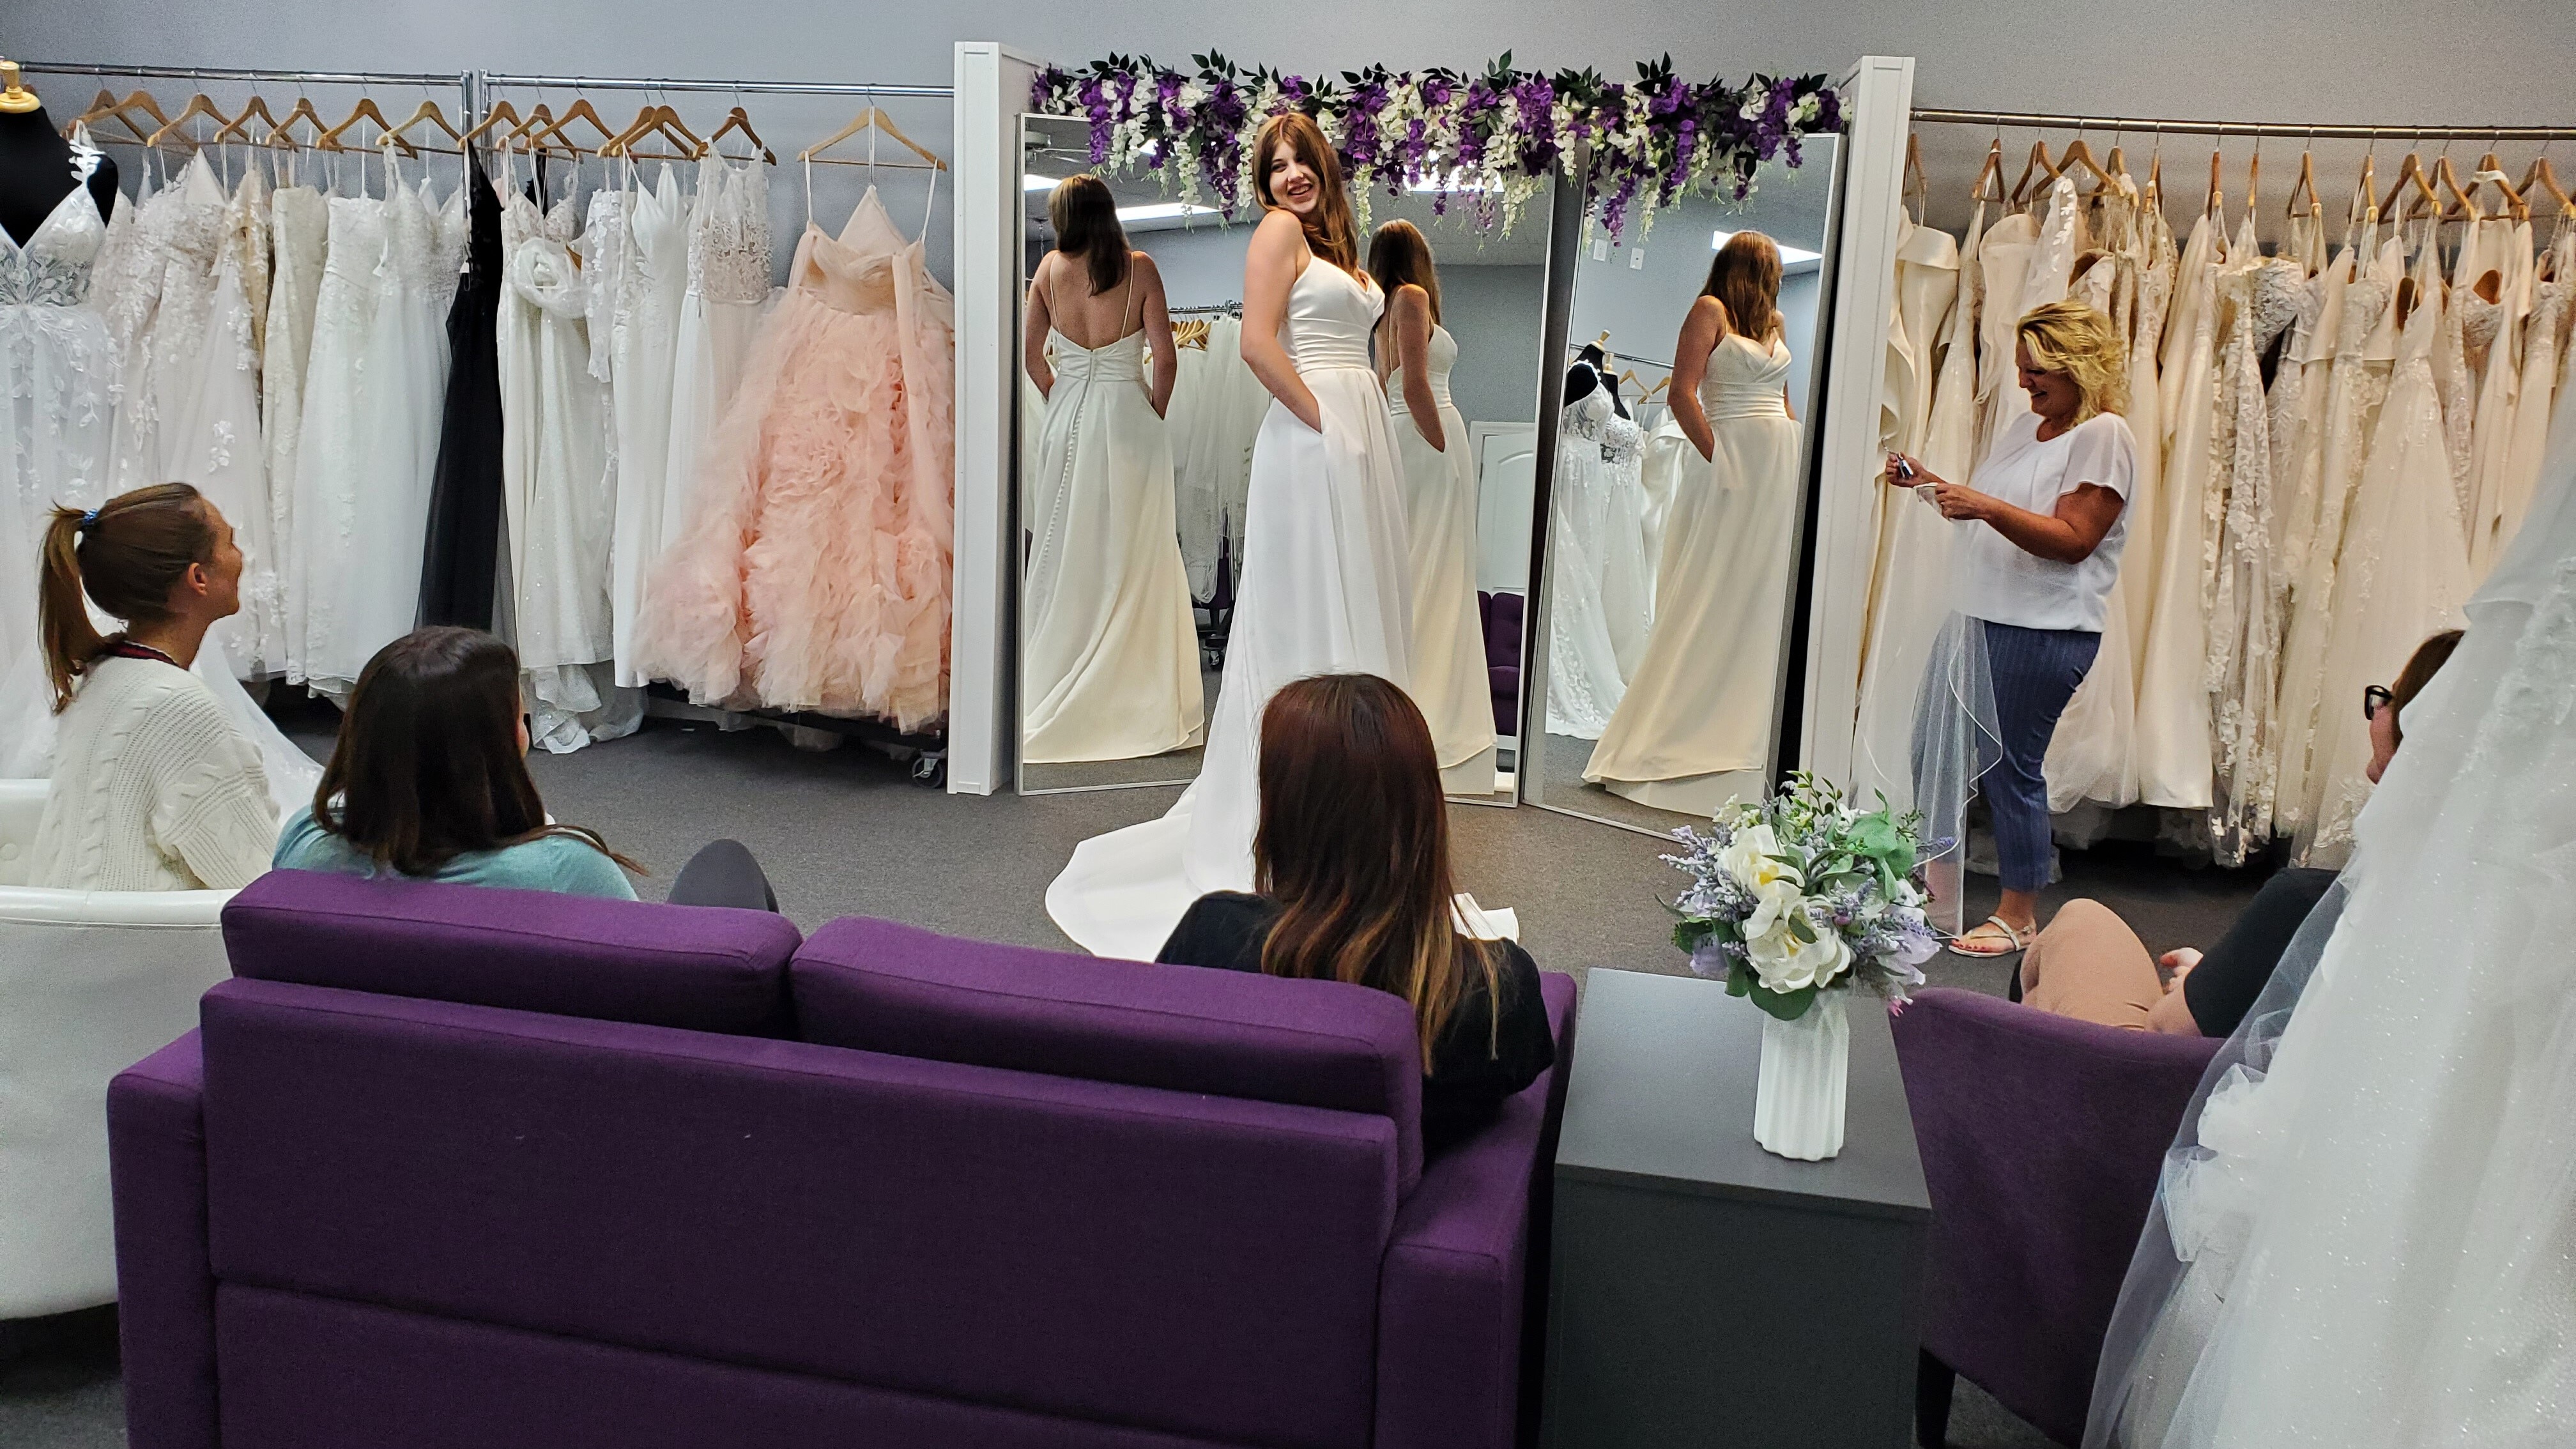 CBB viewing area bridal appointment